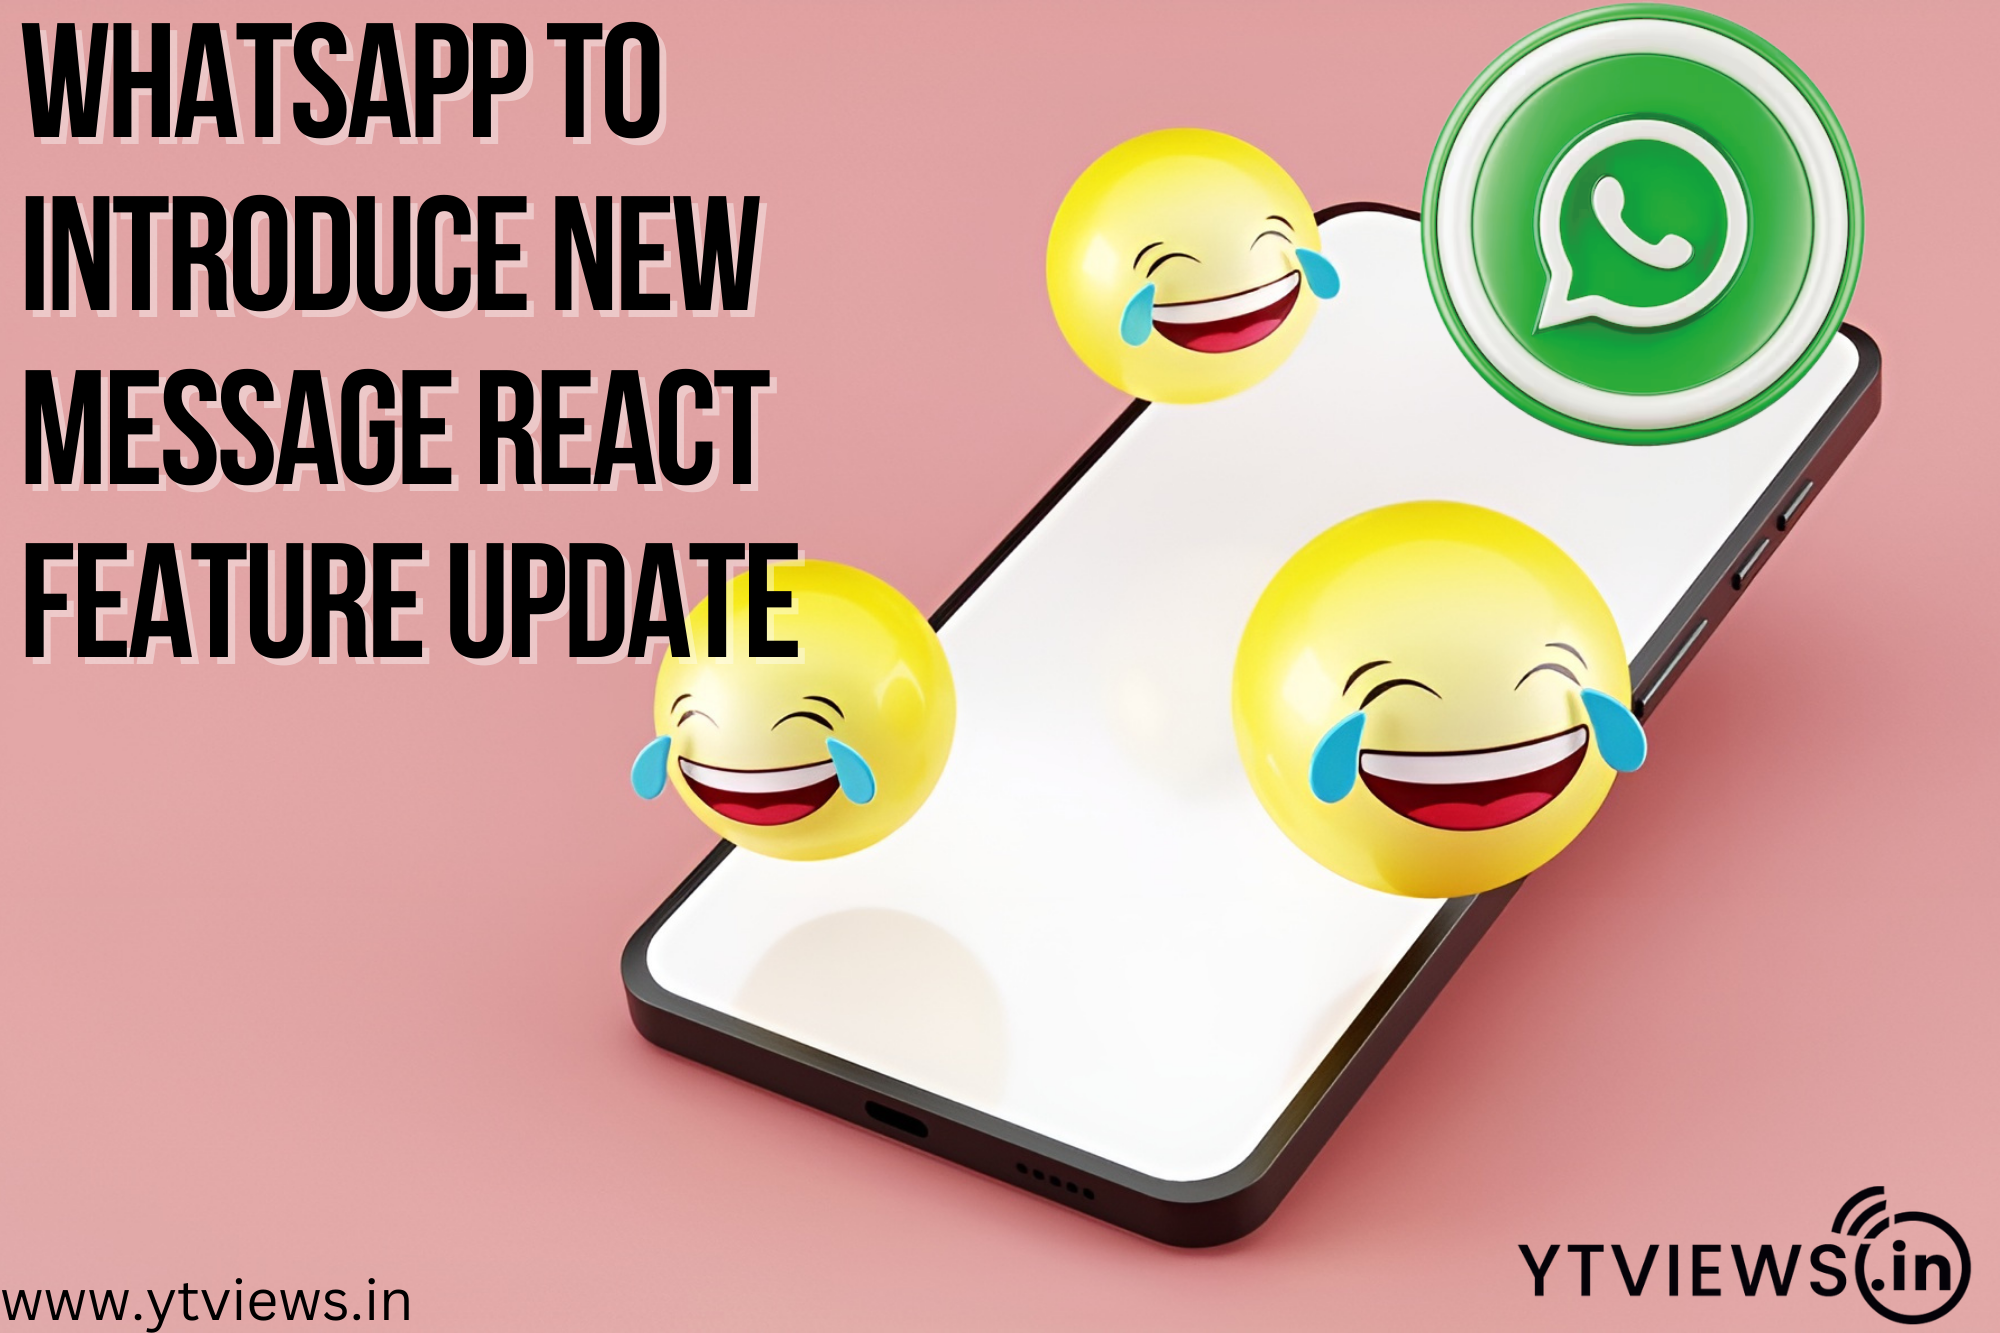 WhatsApp To Introduce New Message React Feature Update